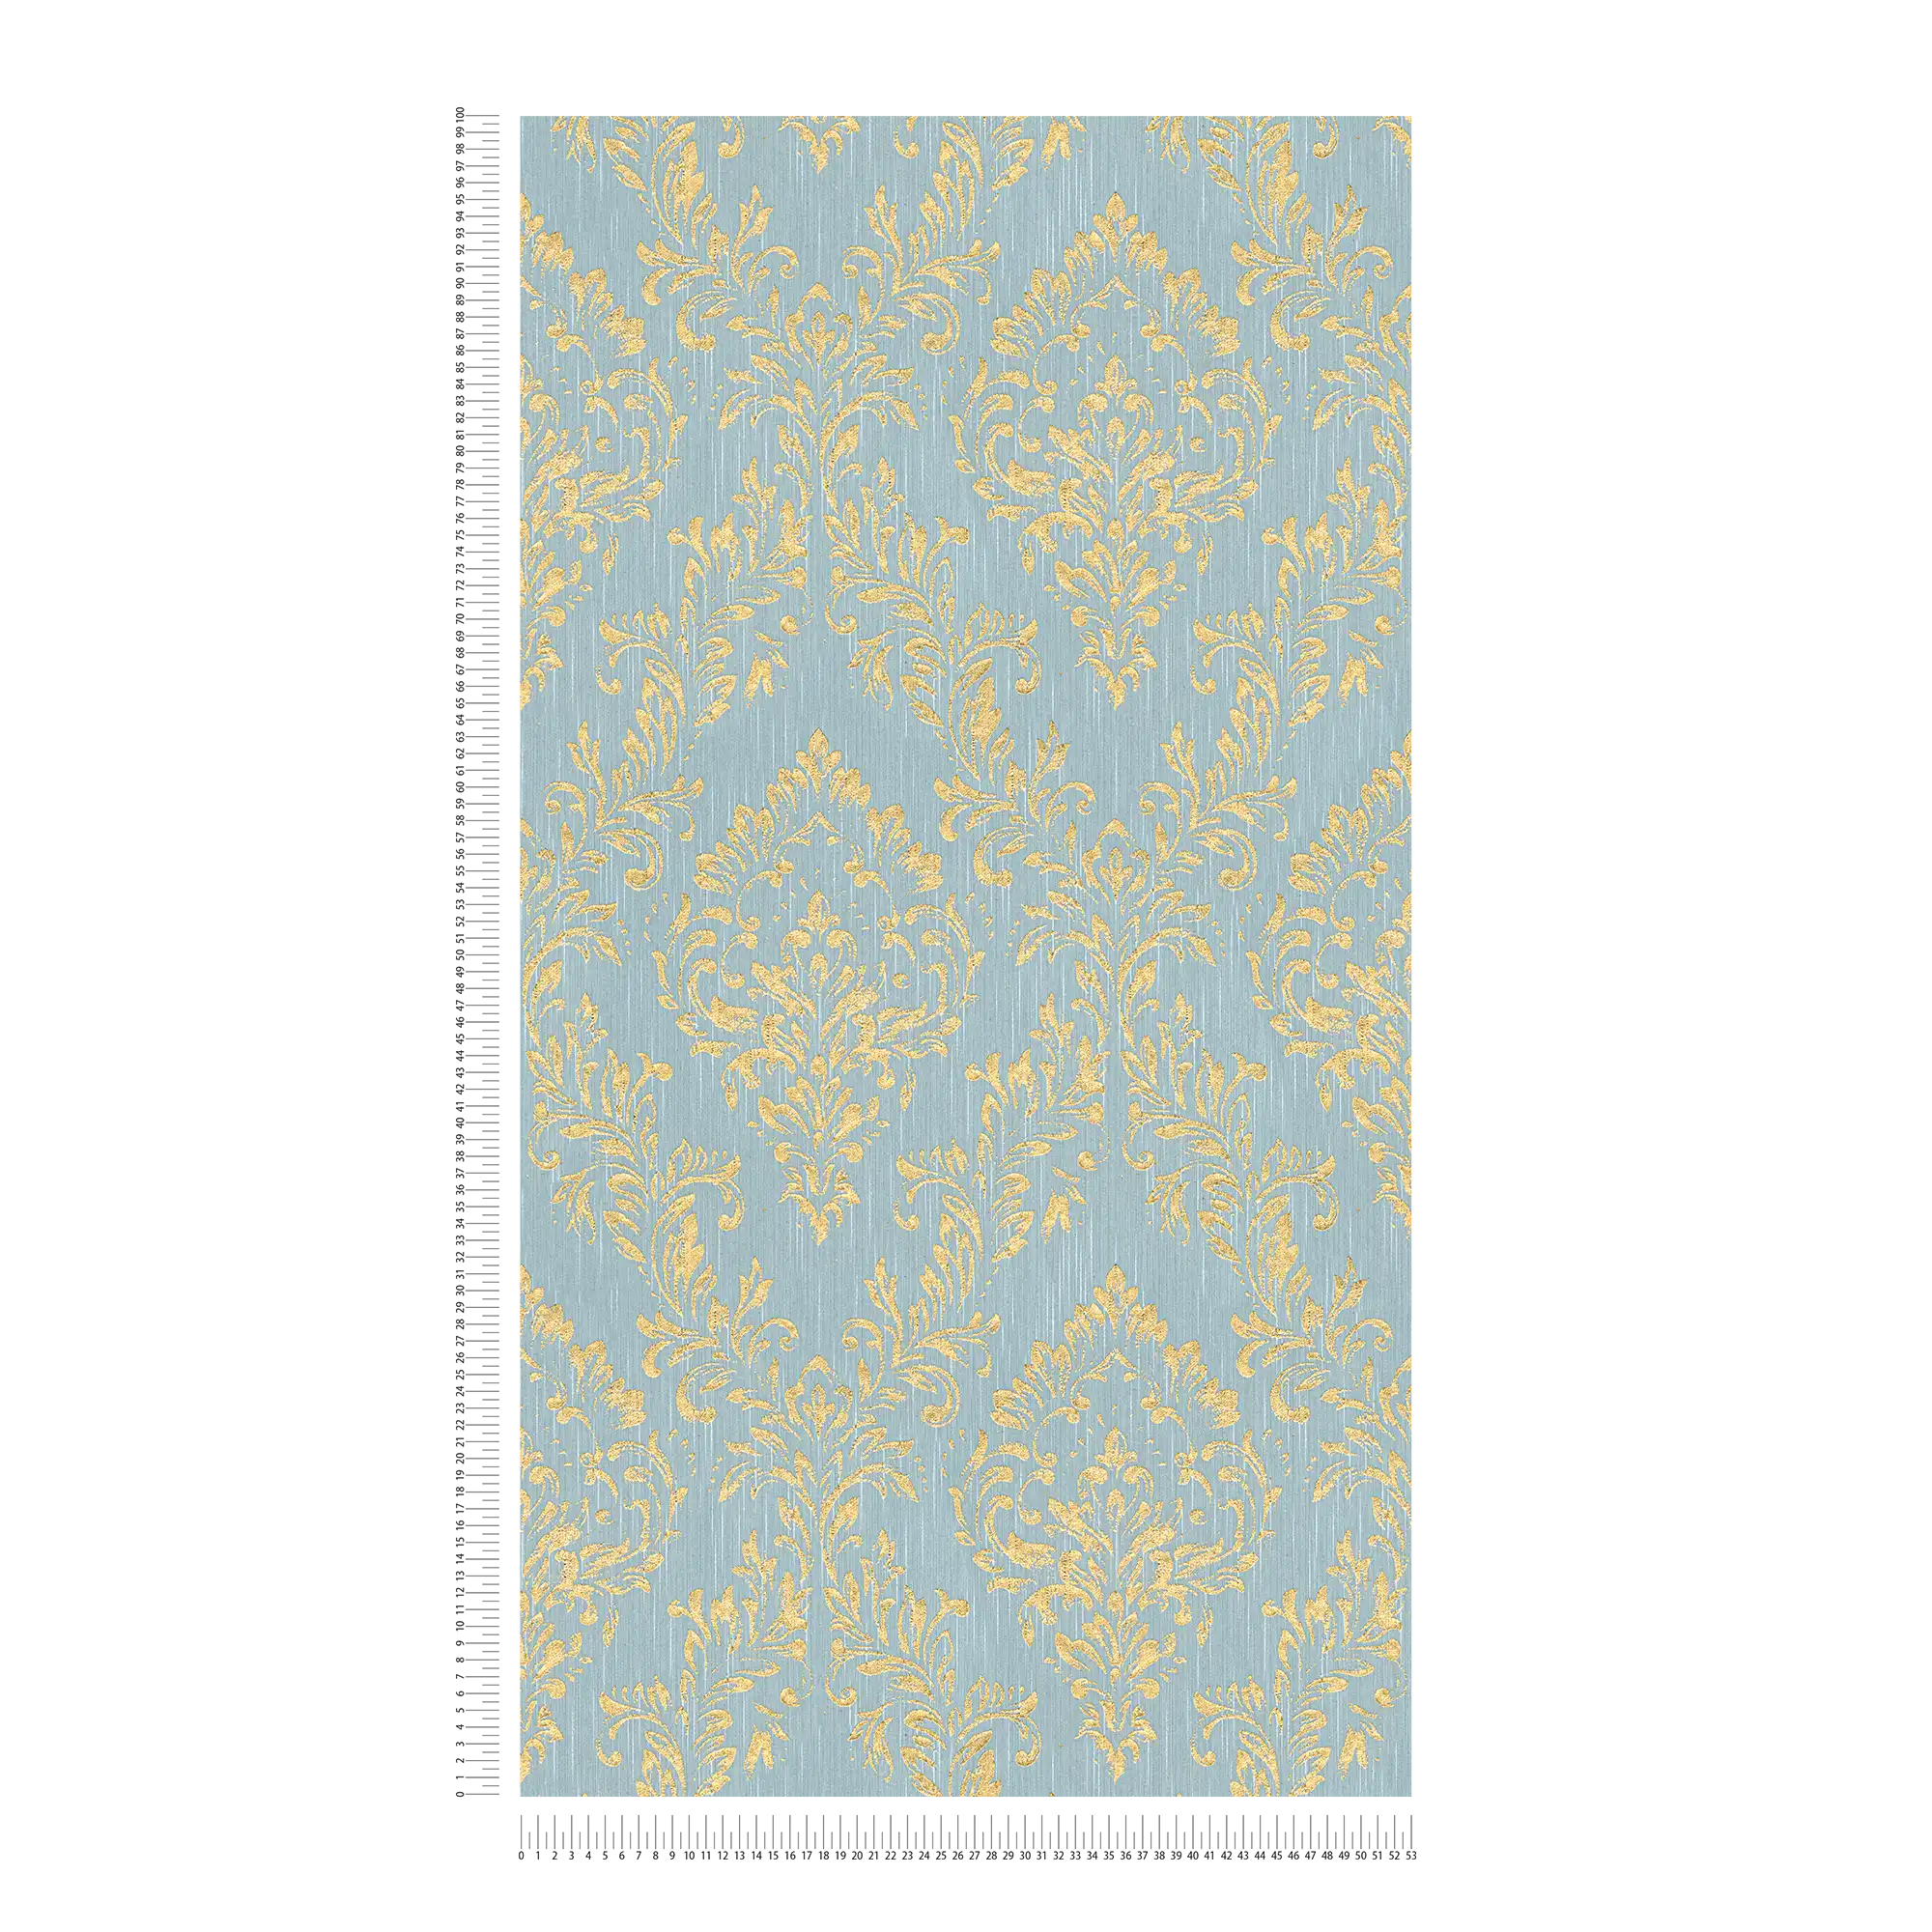             Ornament wallpaper floral with gold glitter effect - gold, blue, green
        